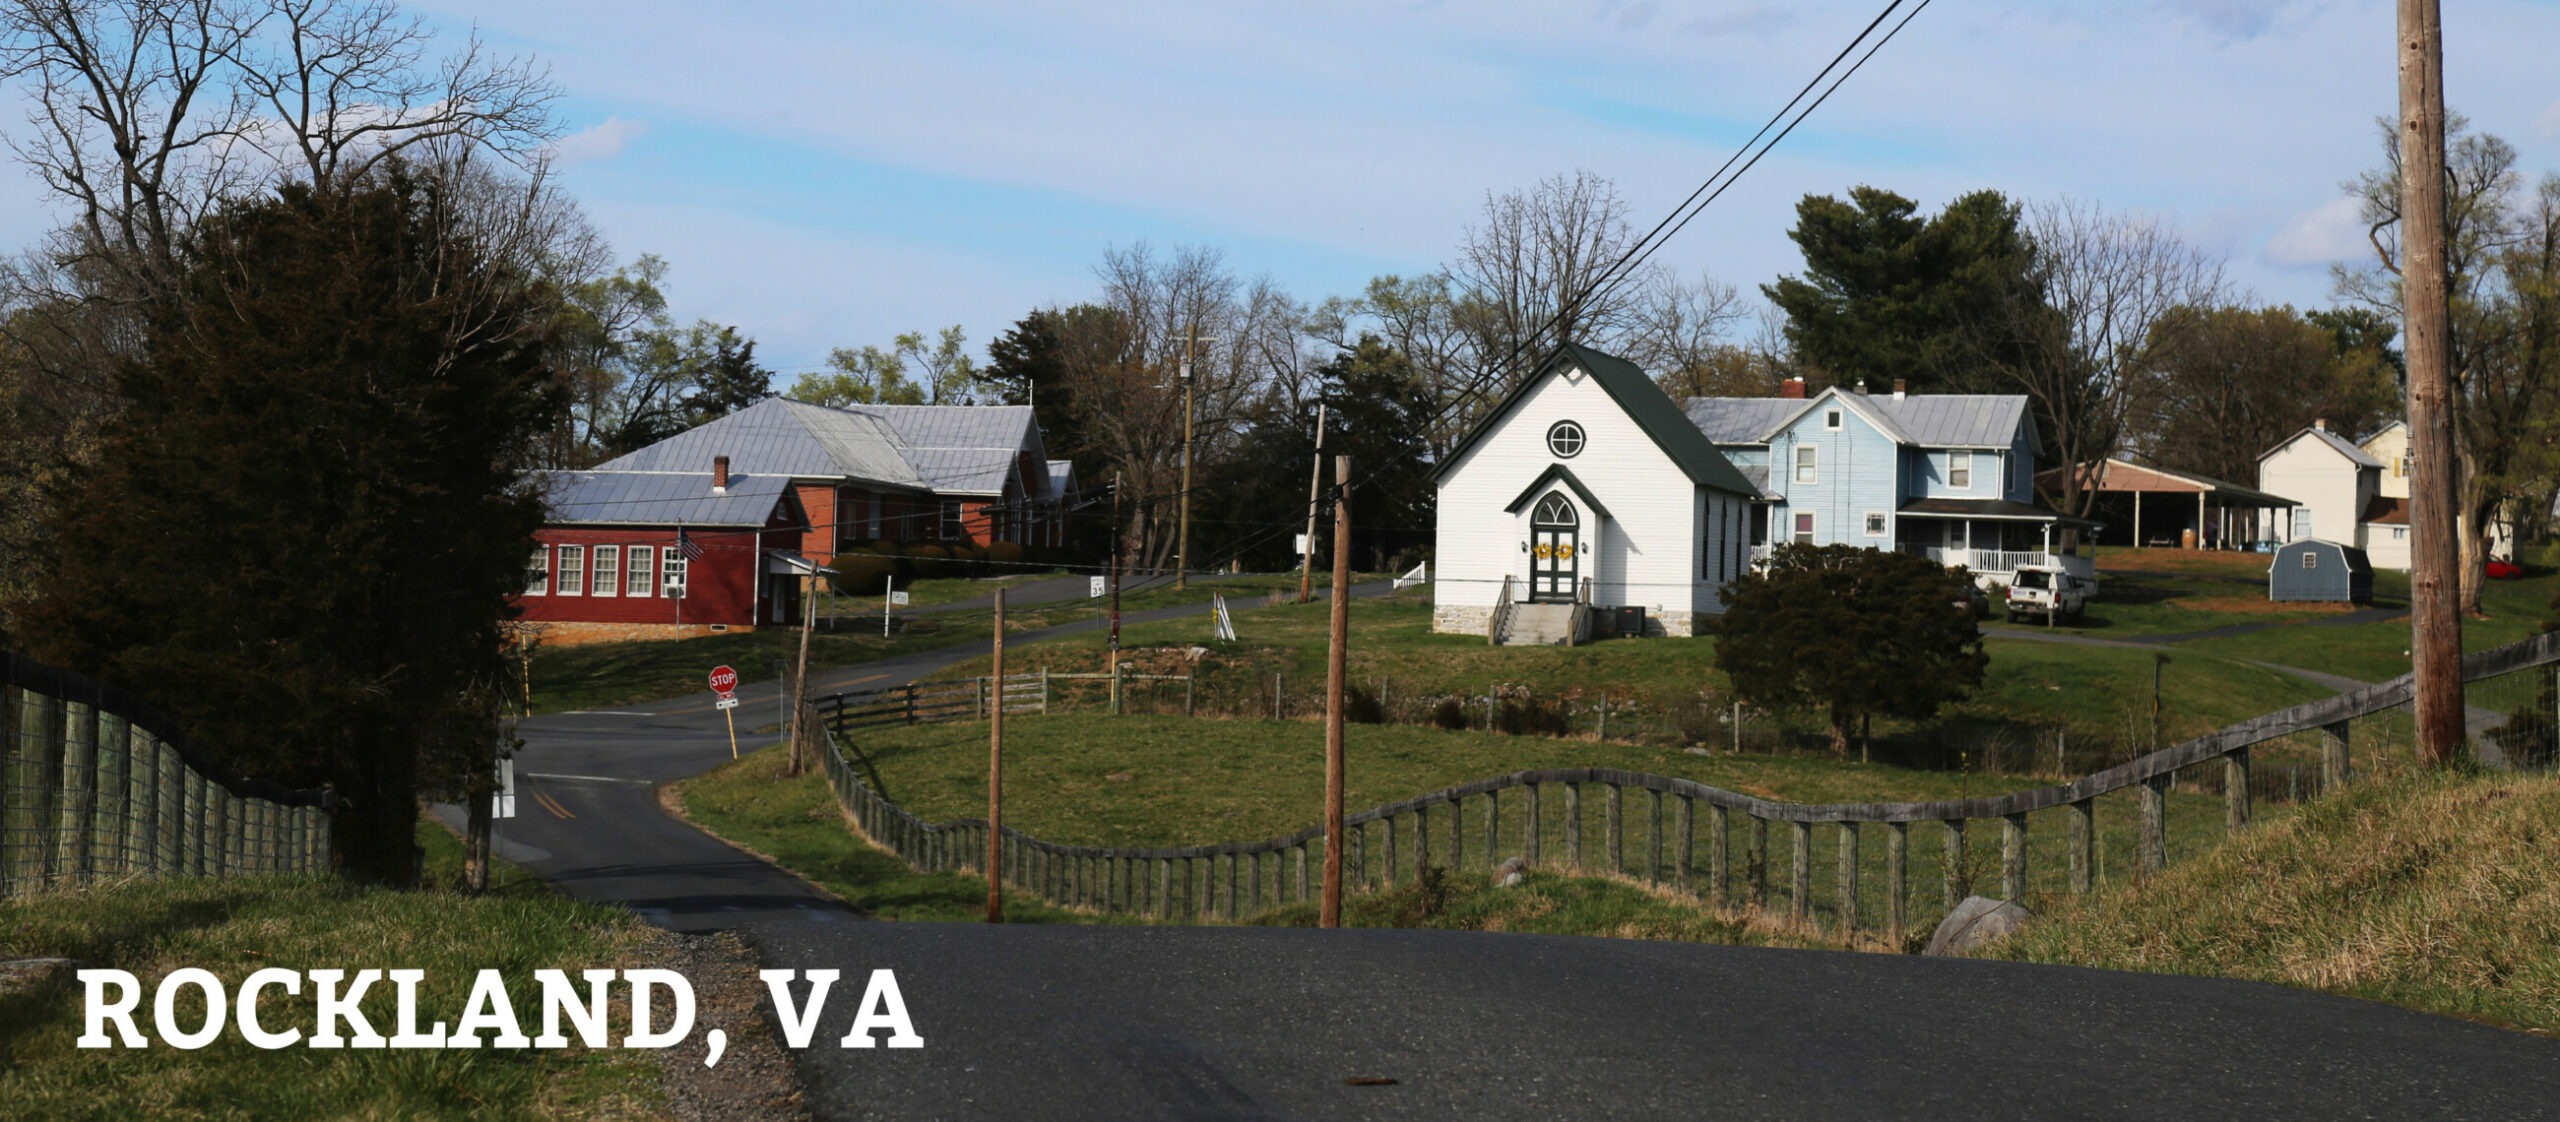 Historic churches and homes dot a narrow rural roadside bordered on both sides by a wooden farm fence. 